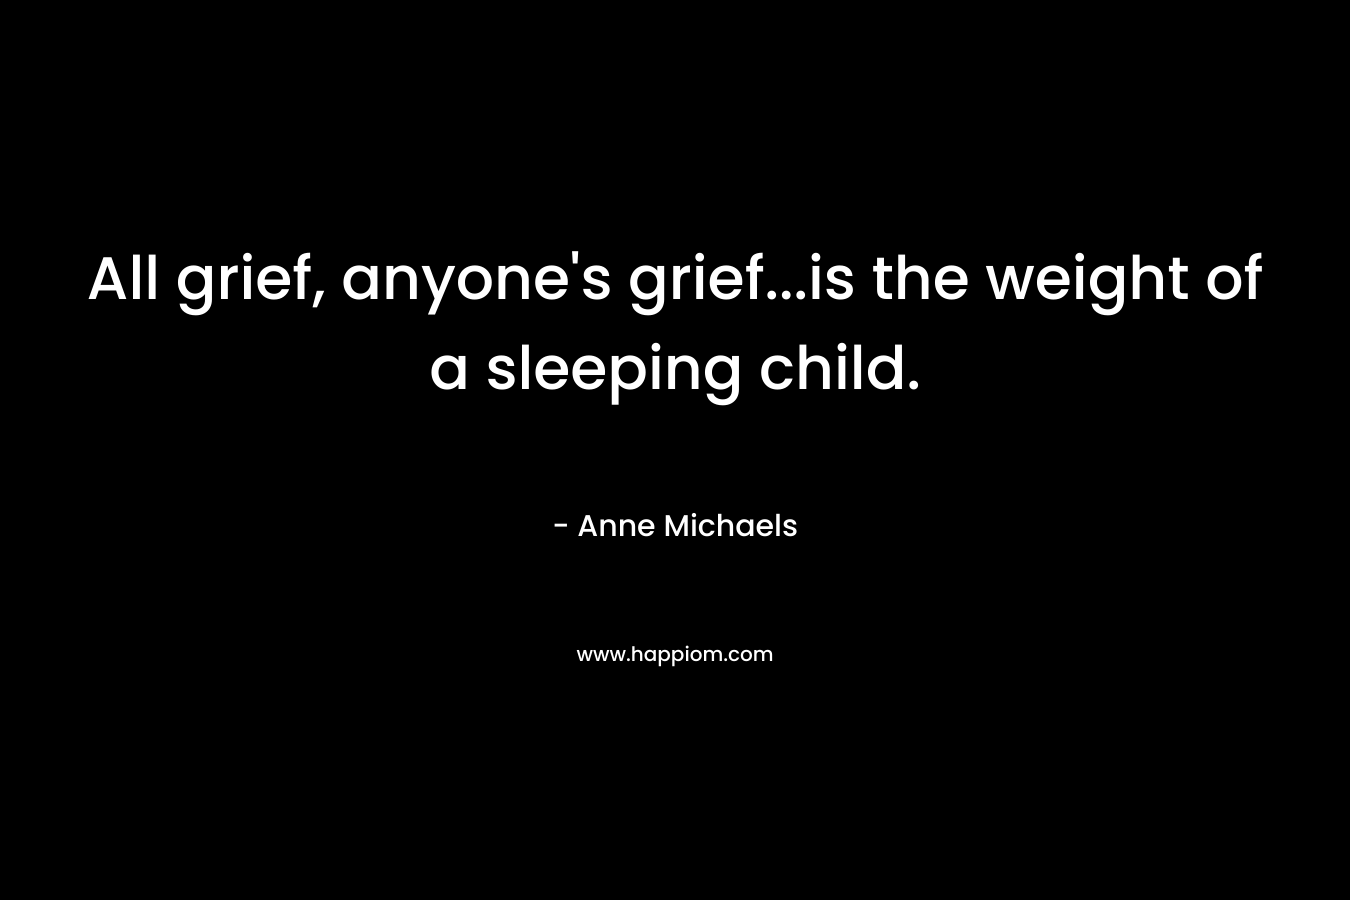 All grief, anyone’s grief…is the weight of a sleeping child. – Anne Michaels